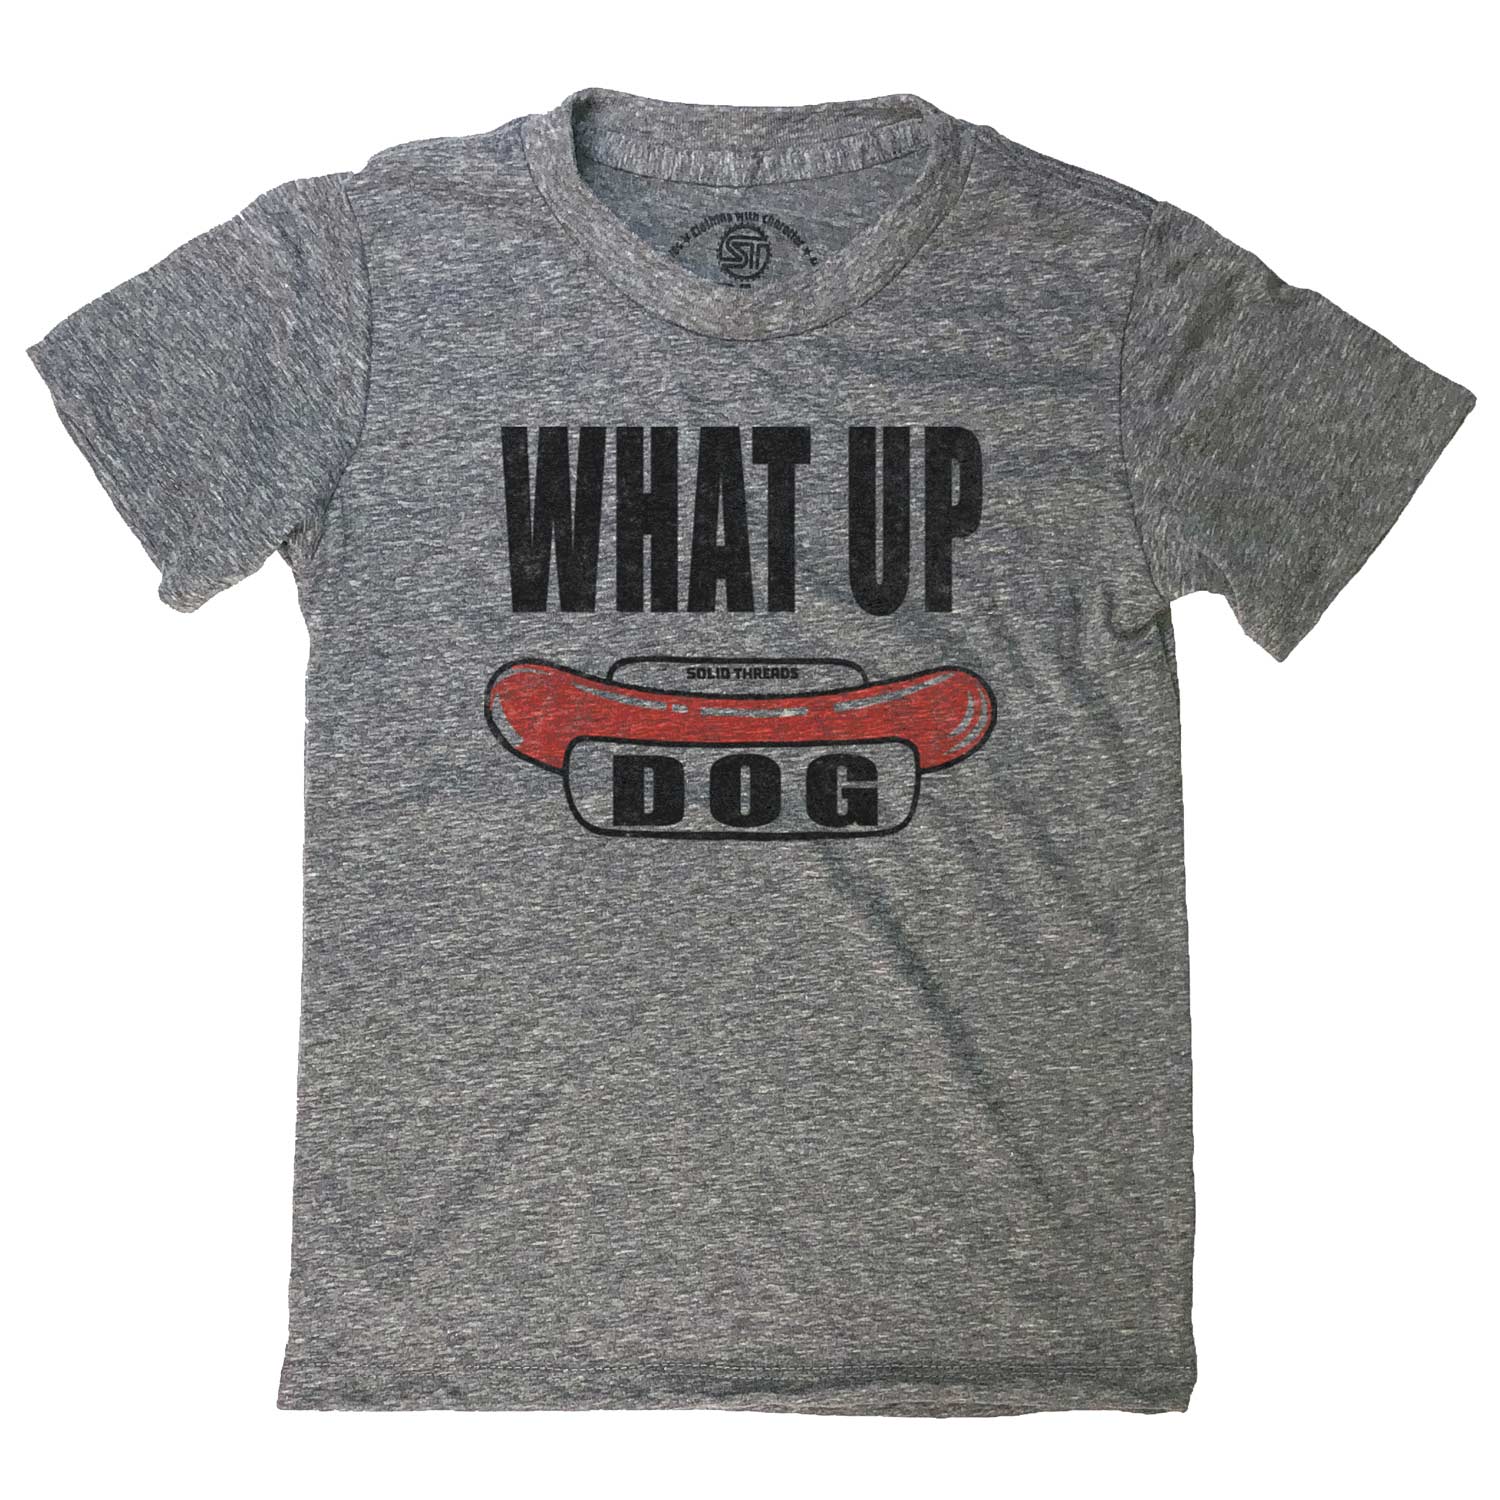 Kids What Up Dog Retro Barbecue Graphic T-Shirt | Cute Funny Foodie Tee | Solid Threads